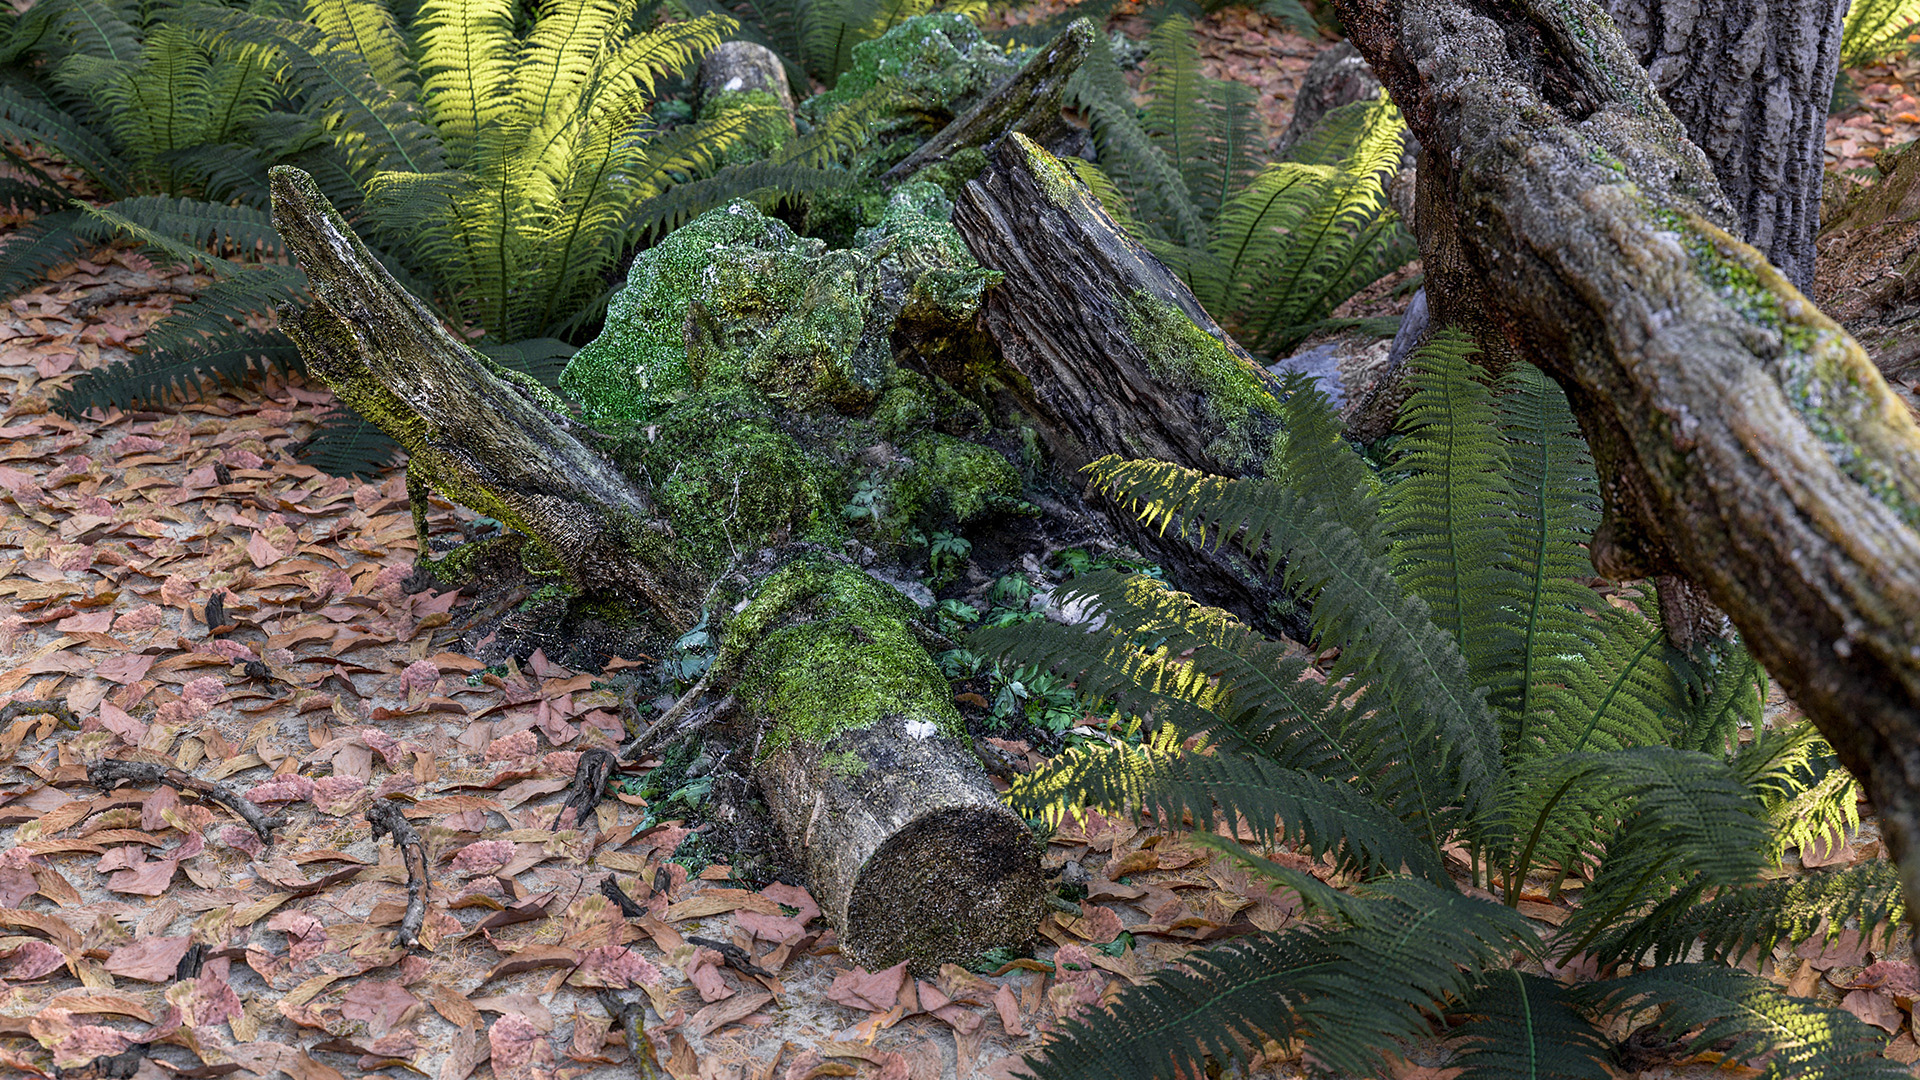 Figure 6: A mossy log, ferns, and debris on the forest floor. Rendered using Takua Renderer on a M1 Max 14-inch MacBook Pro. Click through for full 4K version.